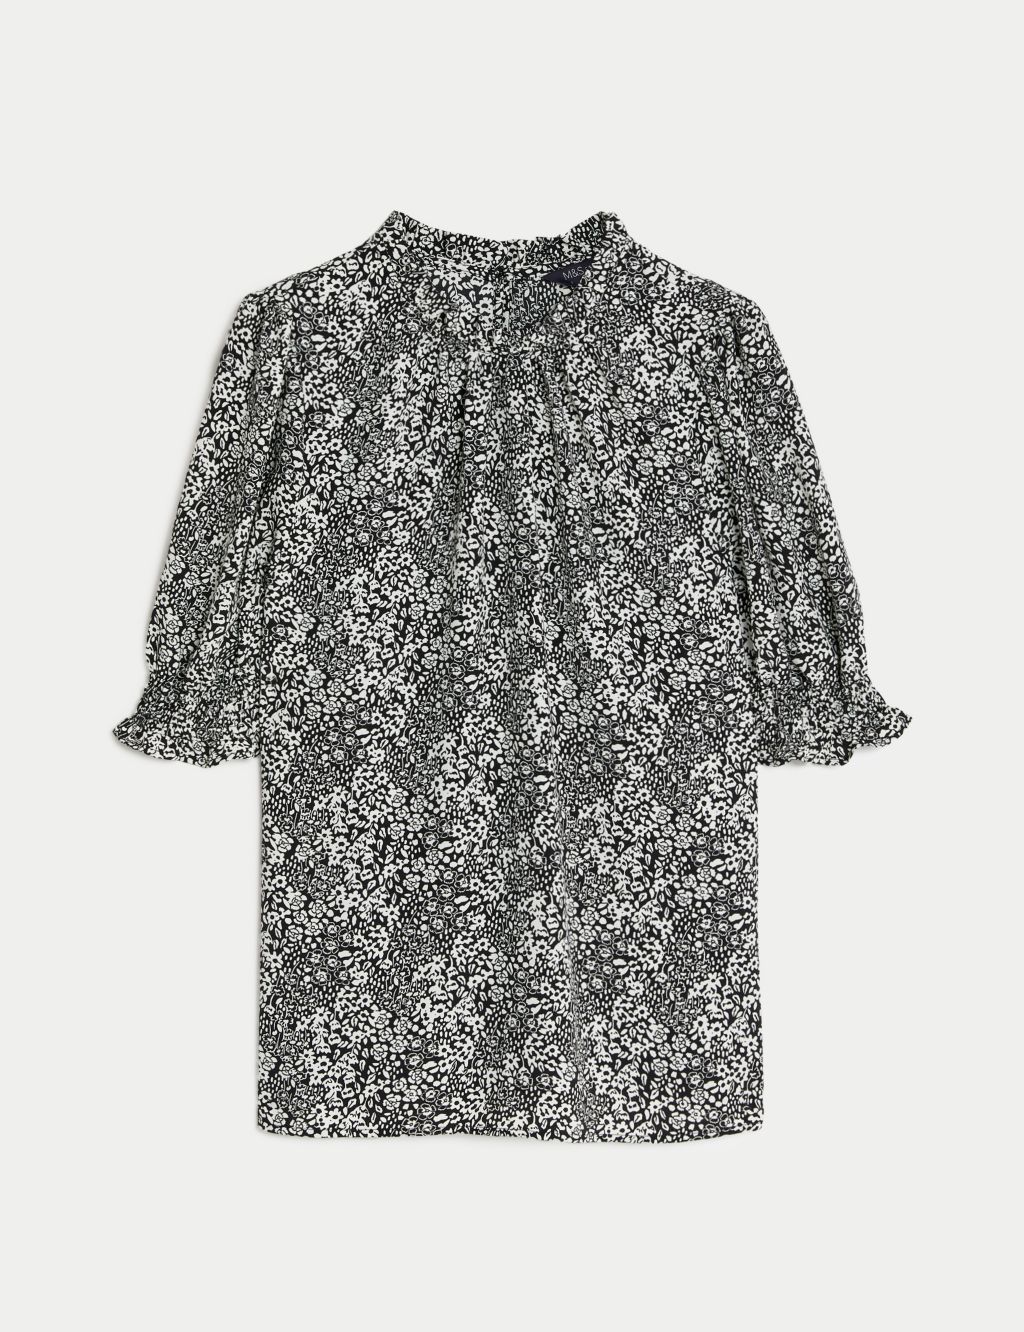 Floral Frill Sleeve Blouse image 2